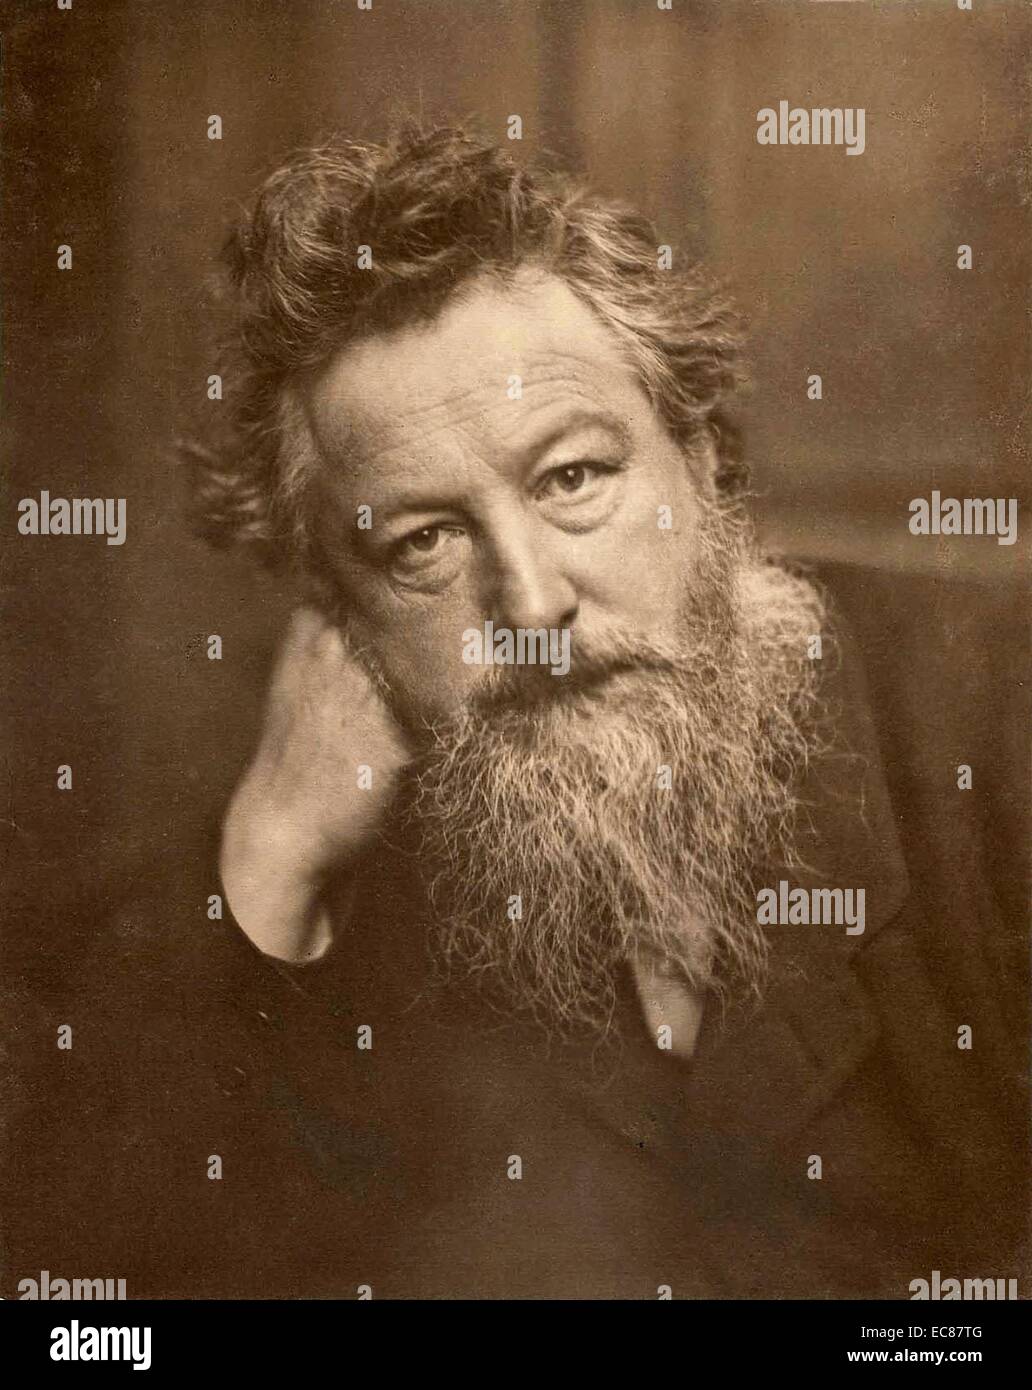 Photograph of William Morris (1834-1896)English textile designer, poet, novelist, translator, and socialist activist. Associated with the British Arts and Crafts Movement. Photographed by Frederick Hollyer. Dated 1887 Stock Photo